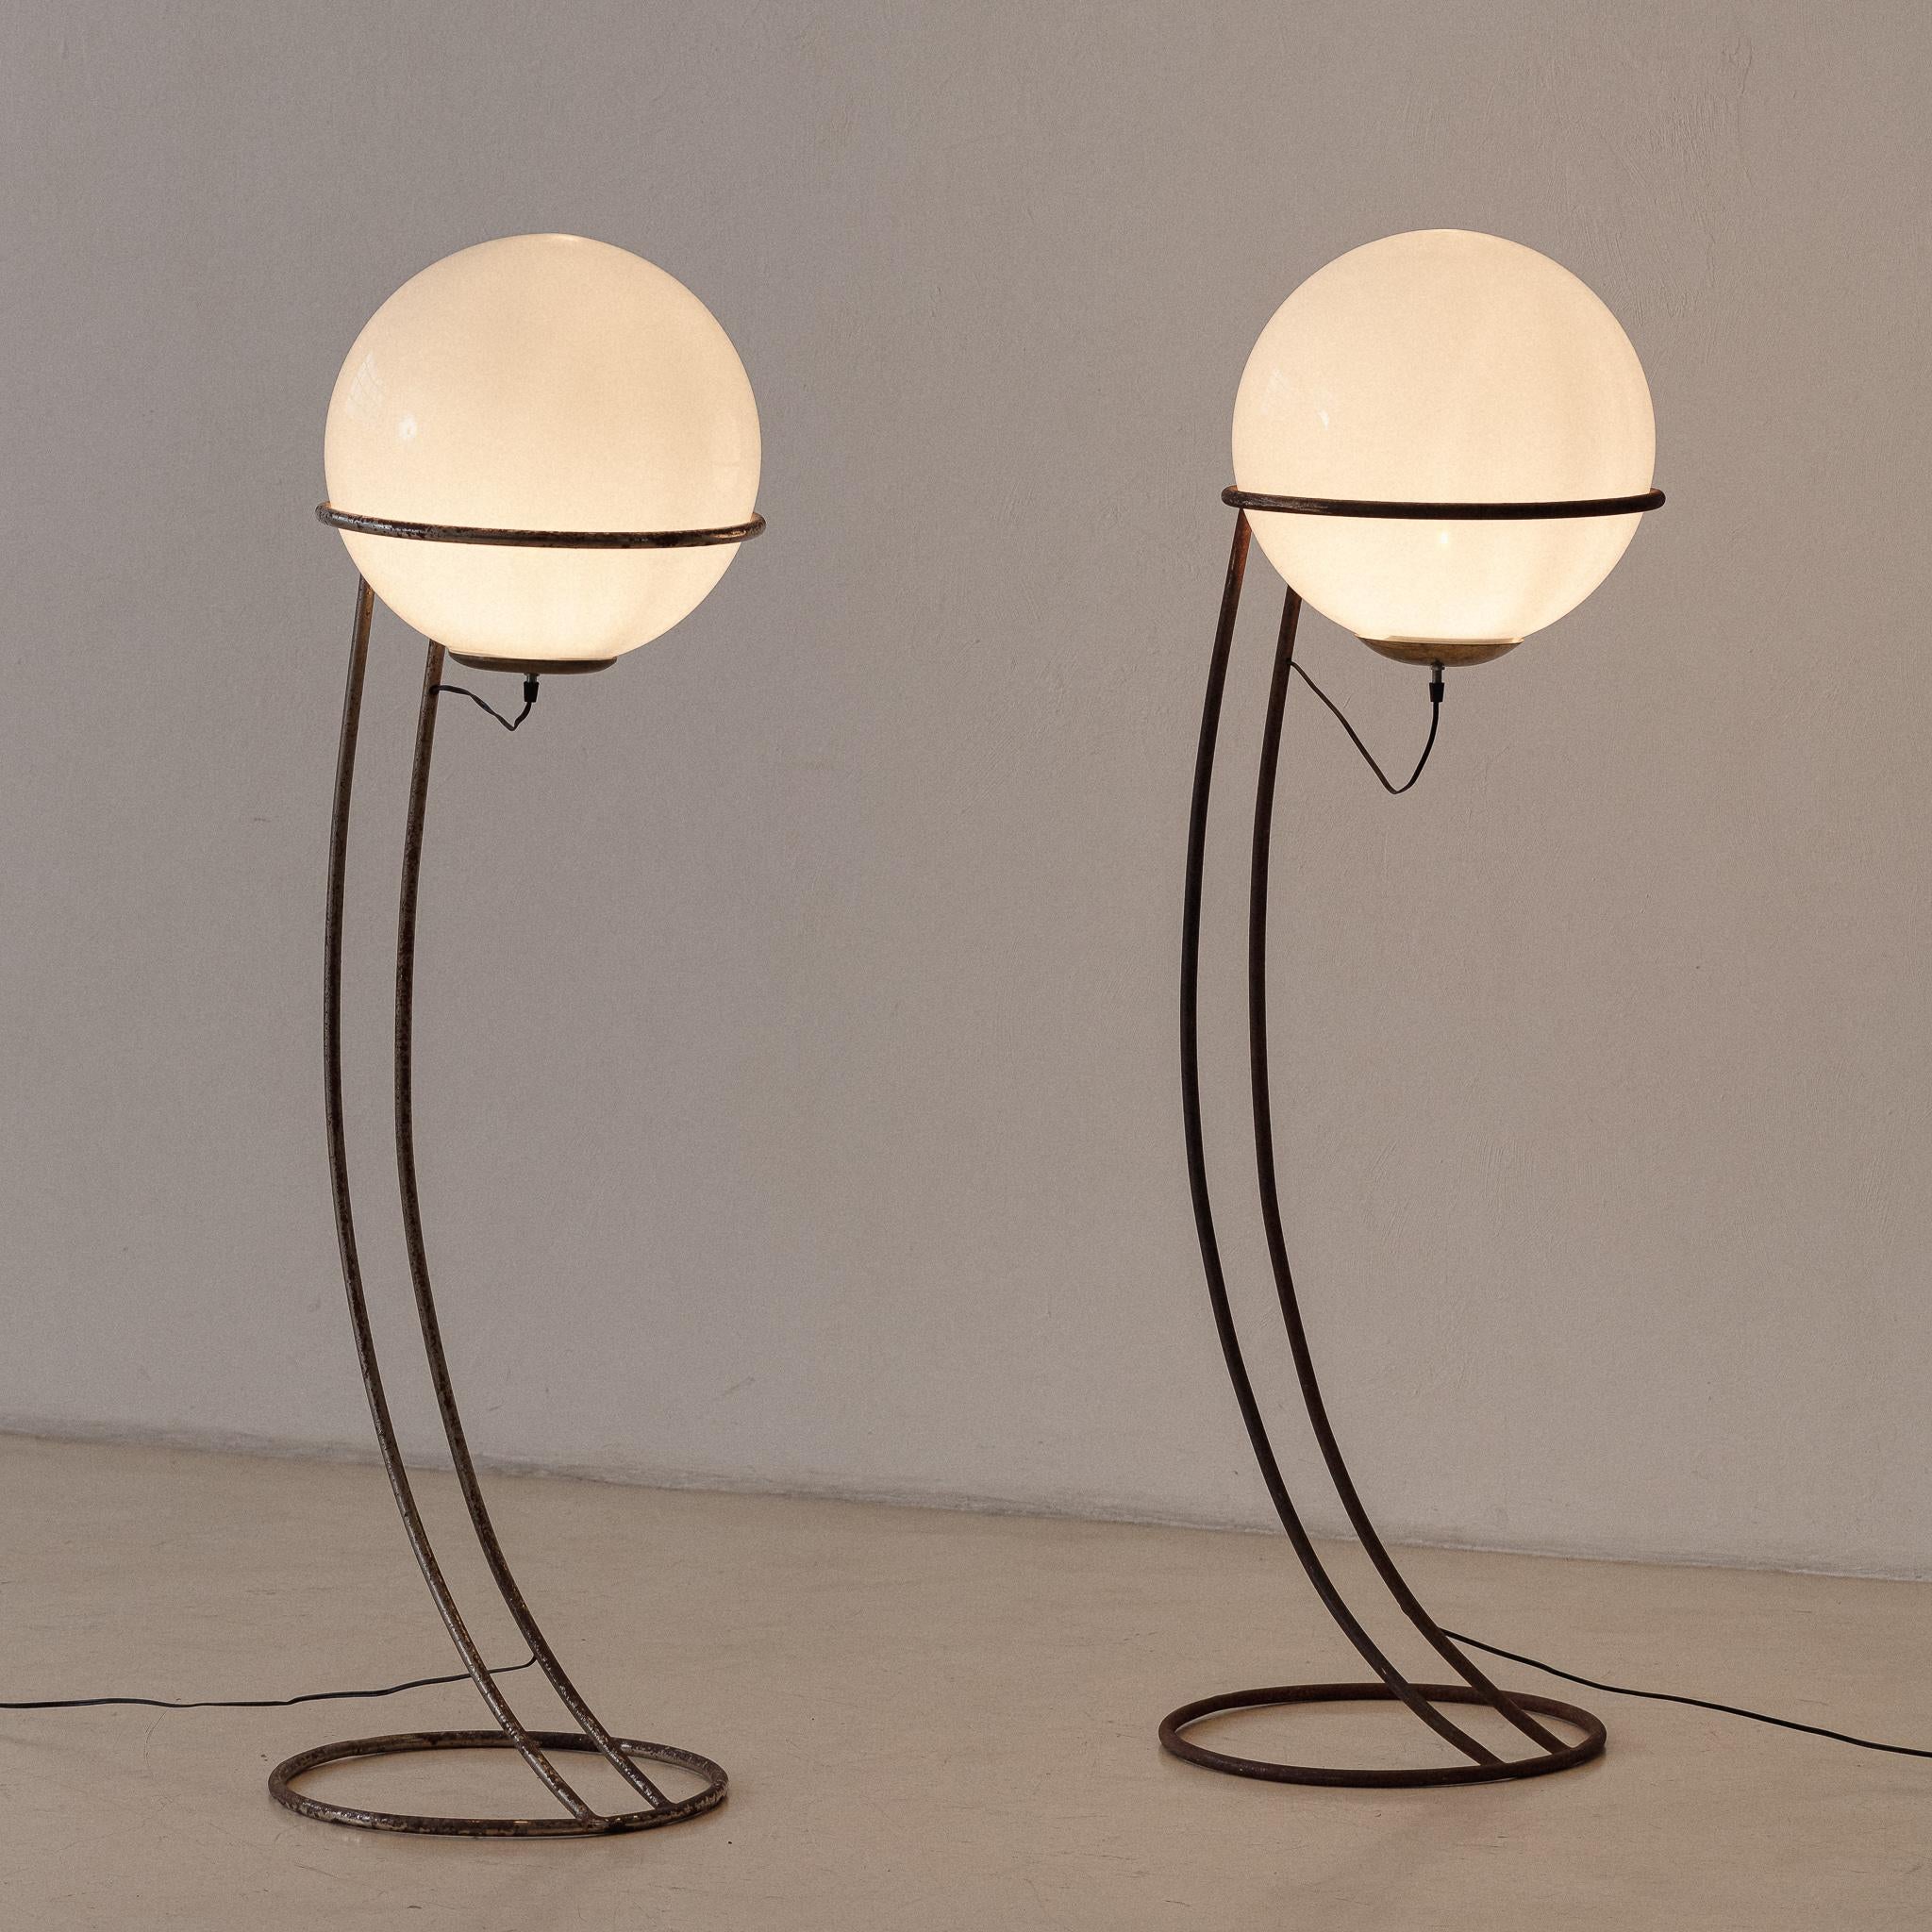 These floor lamps have their base as a curved iron tube with a loop that supports a big glass orb wired from below. The light source is smooth and diffused, ideal for creating a cozy mood.

The authorship is still on research by our team, but it